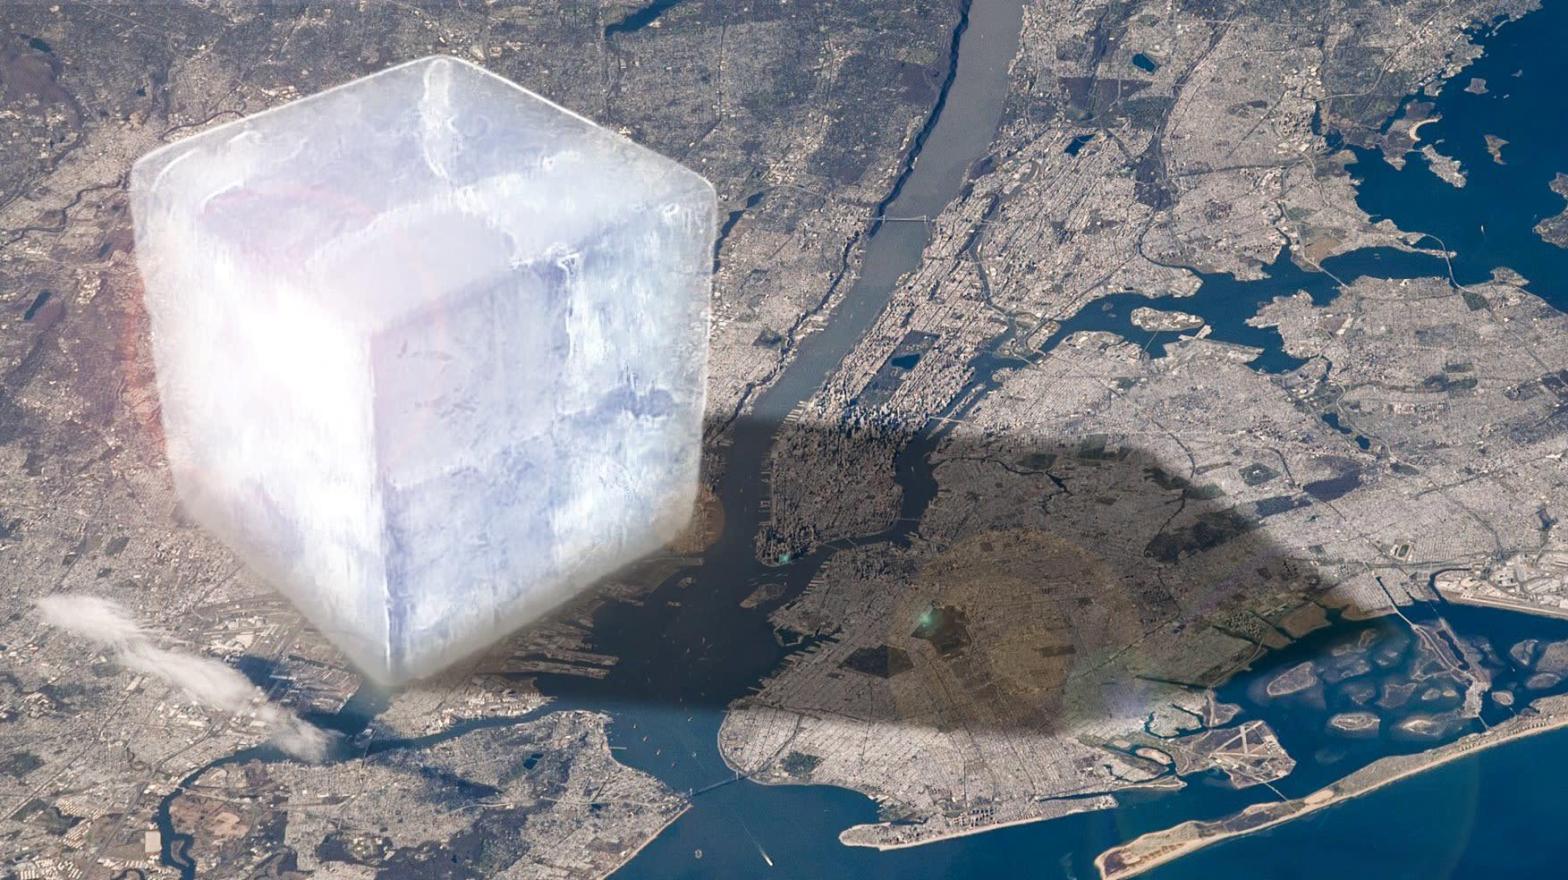 That's one big cube. (Graphic: Planetary Visions)